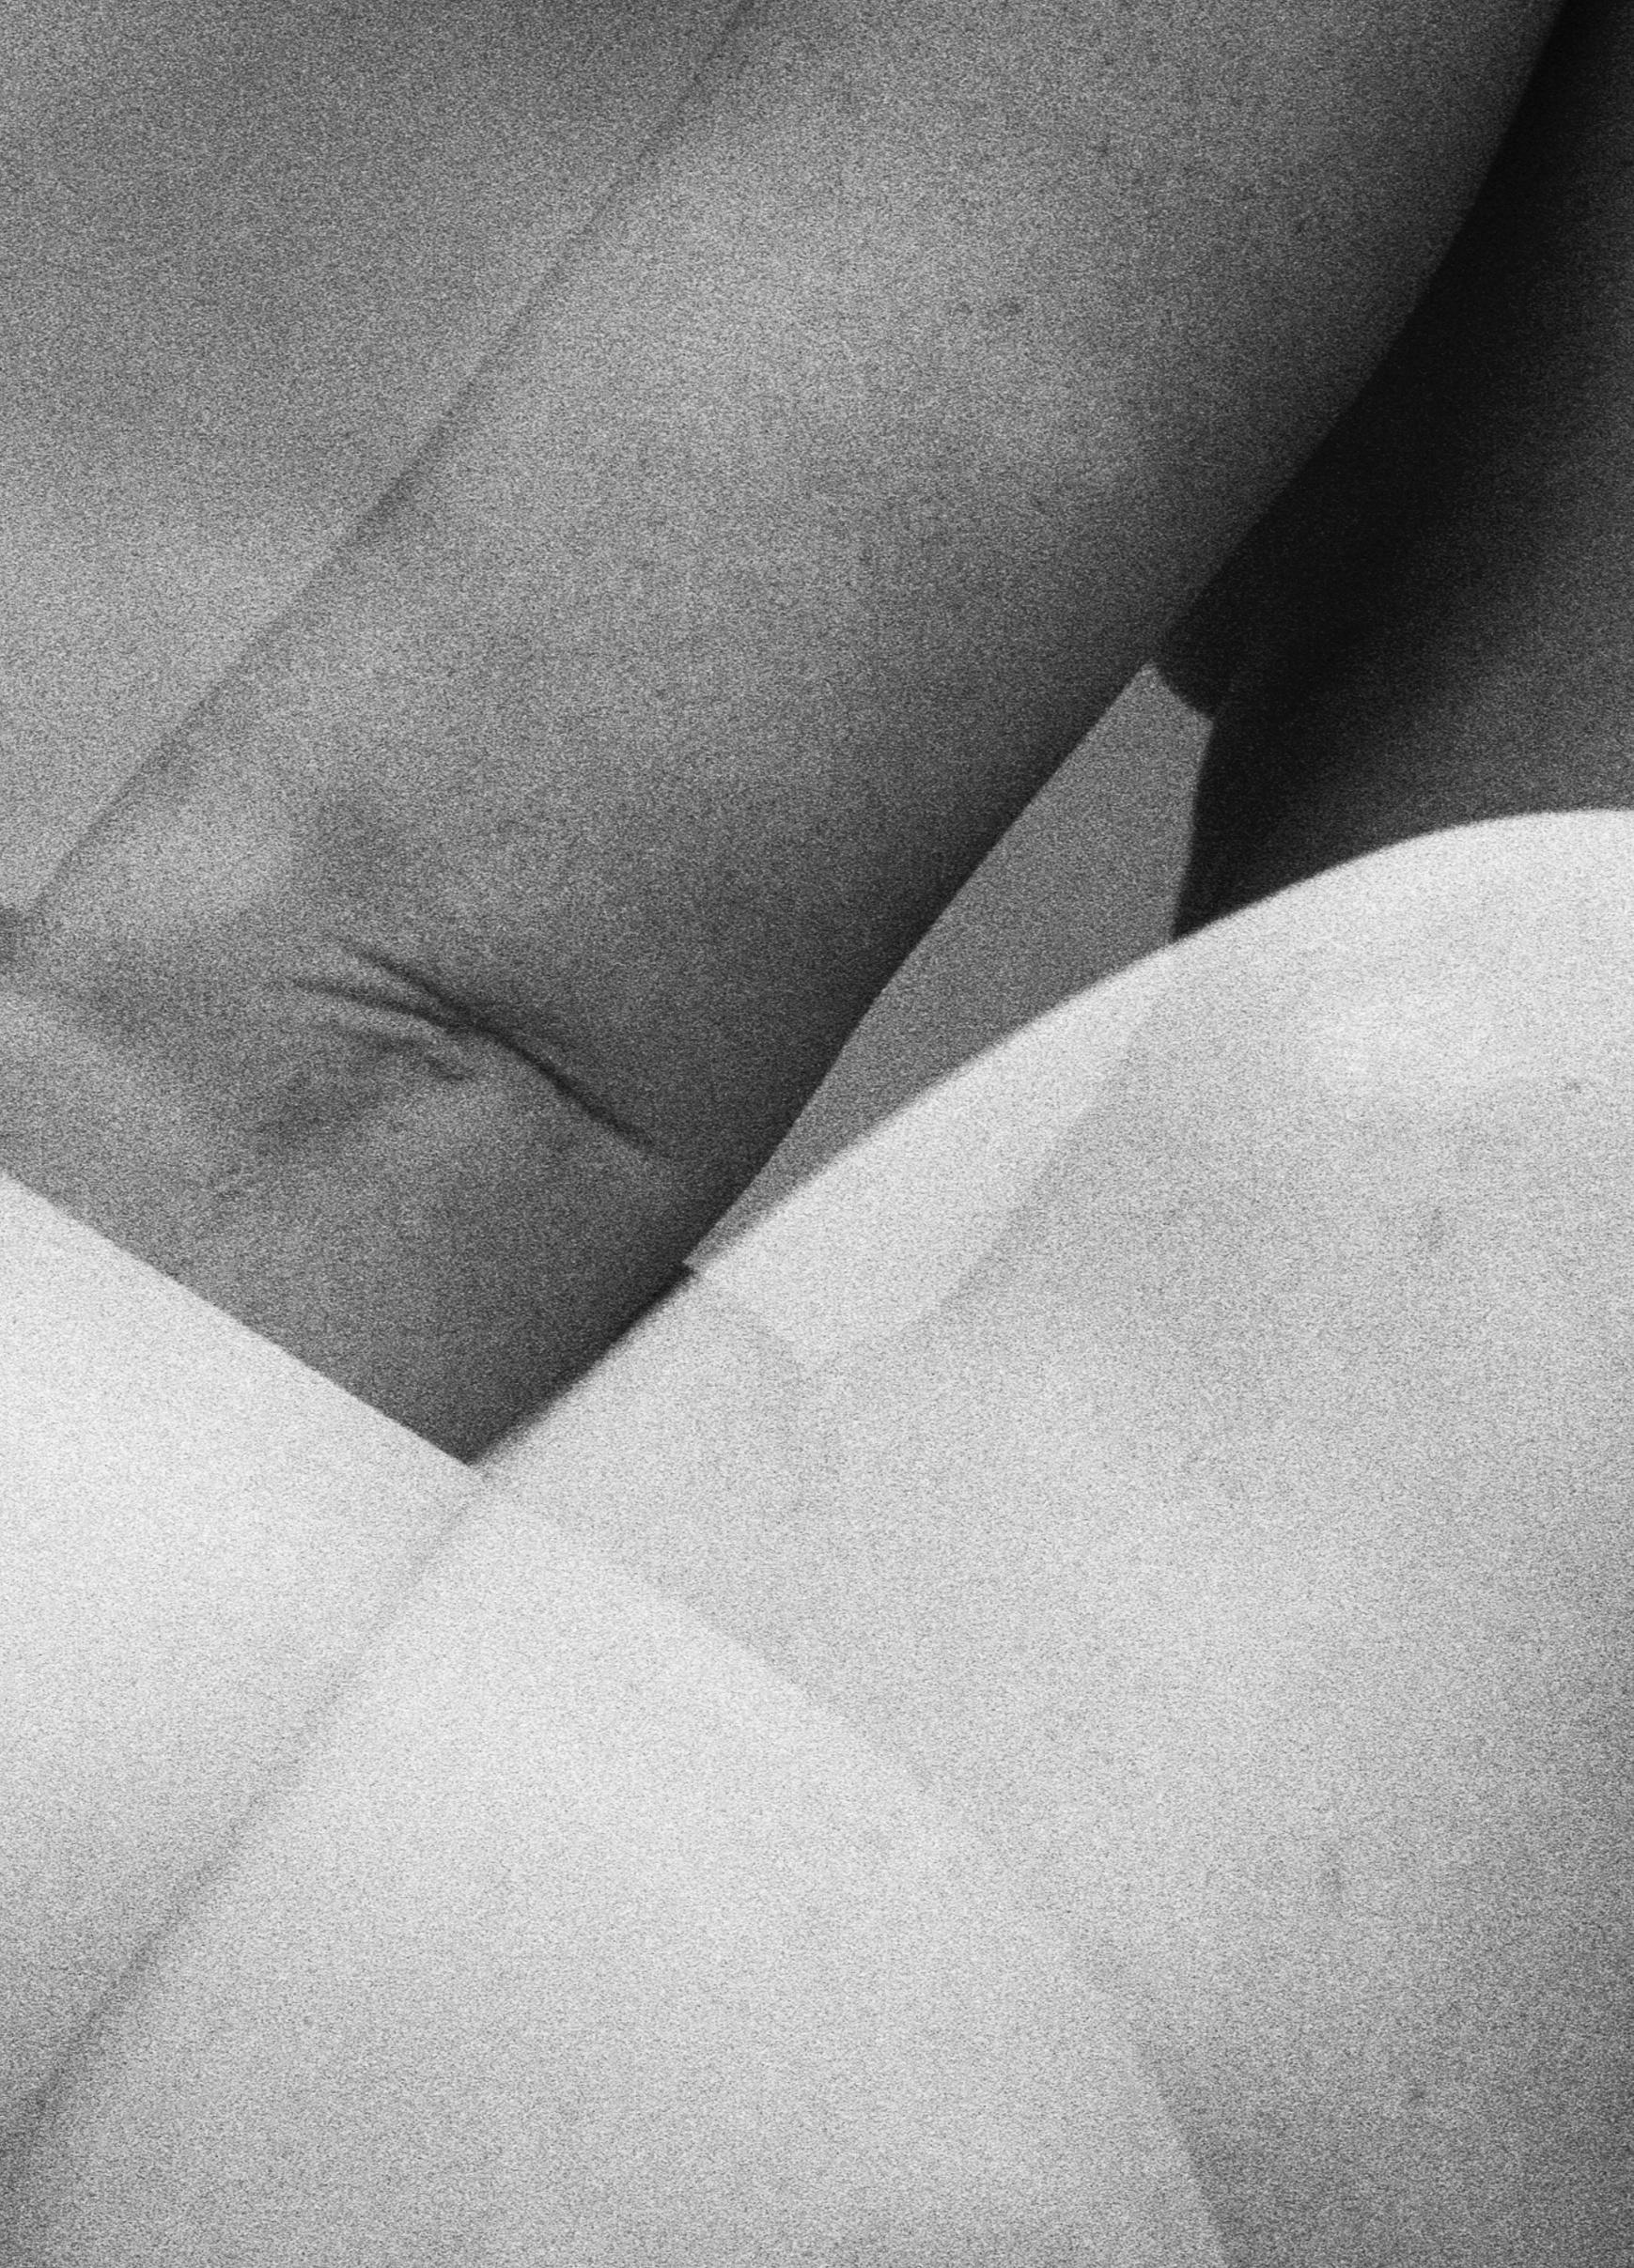 Untitled (Touching) – Lina Scheynius, Black and White, Woman, Body, Nude, Female For Sale 4